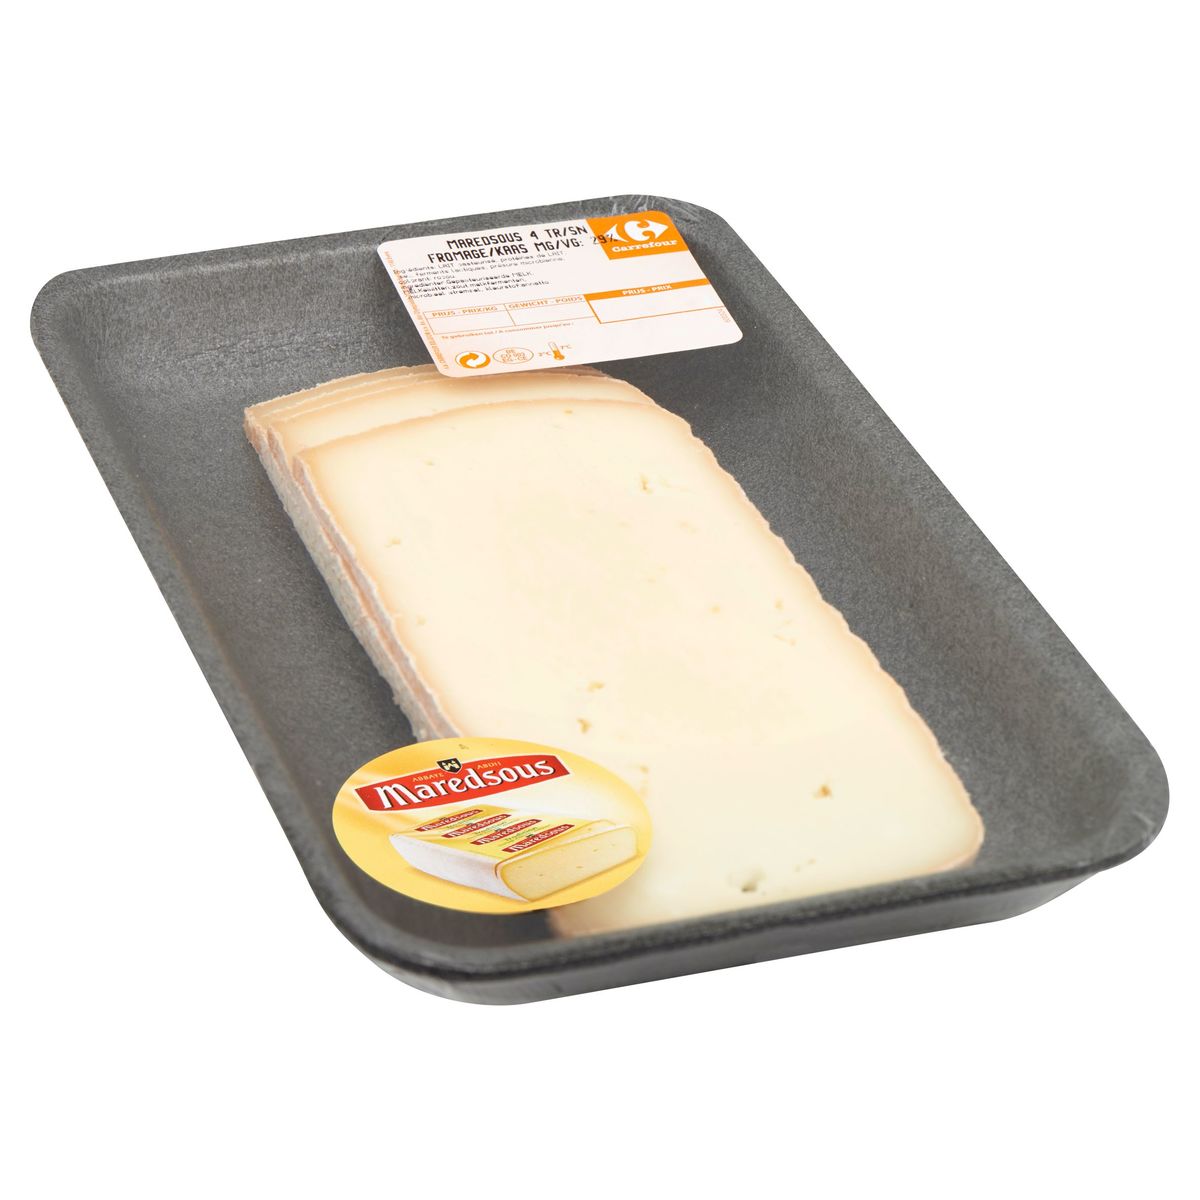 Maredsous Fromage 4 Tranches